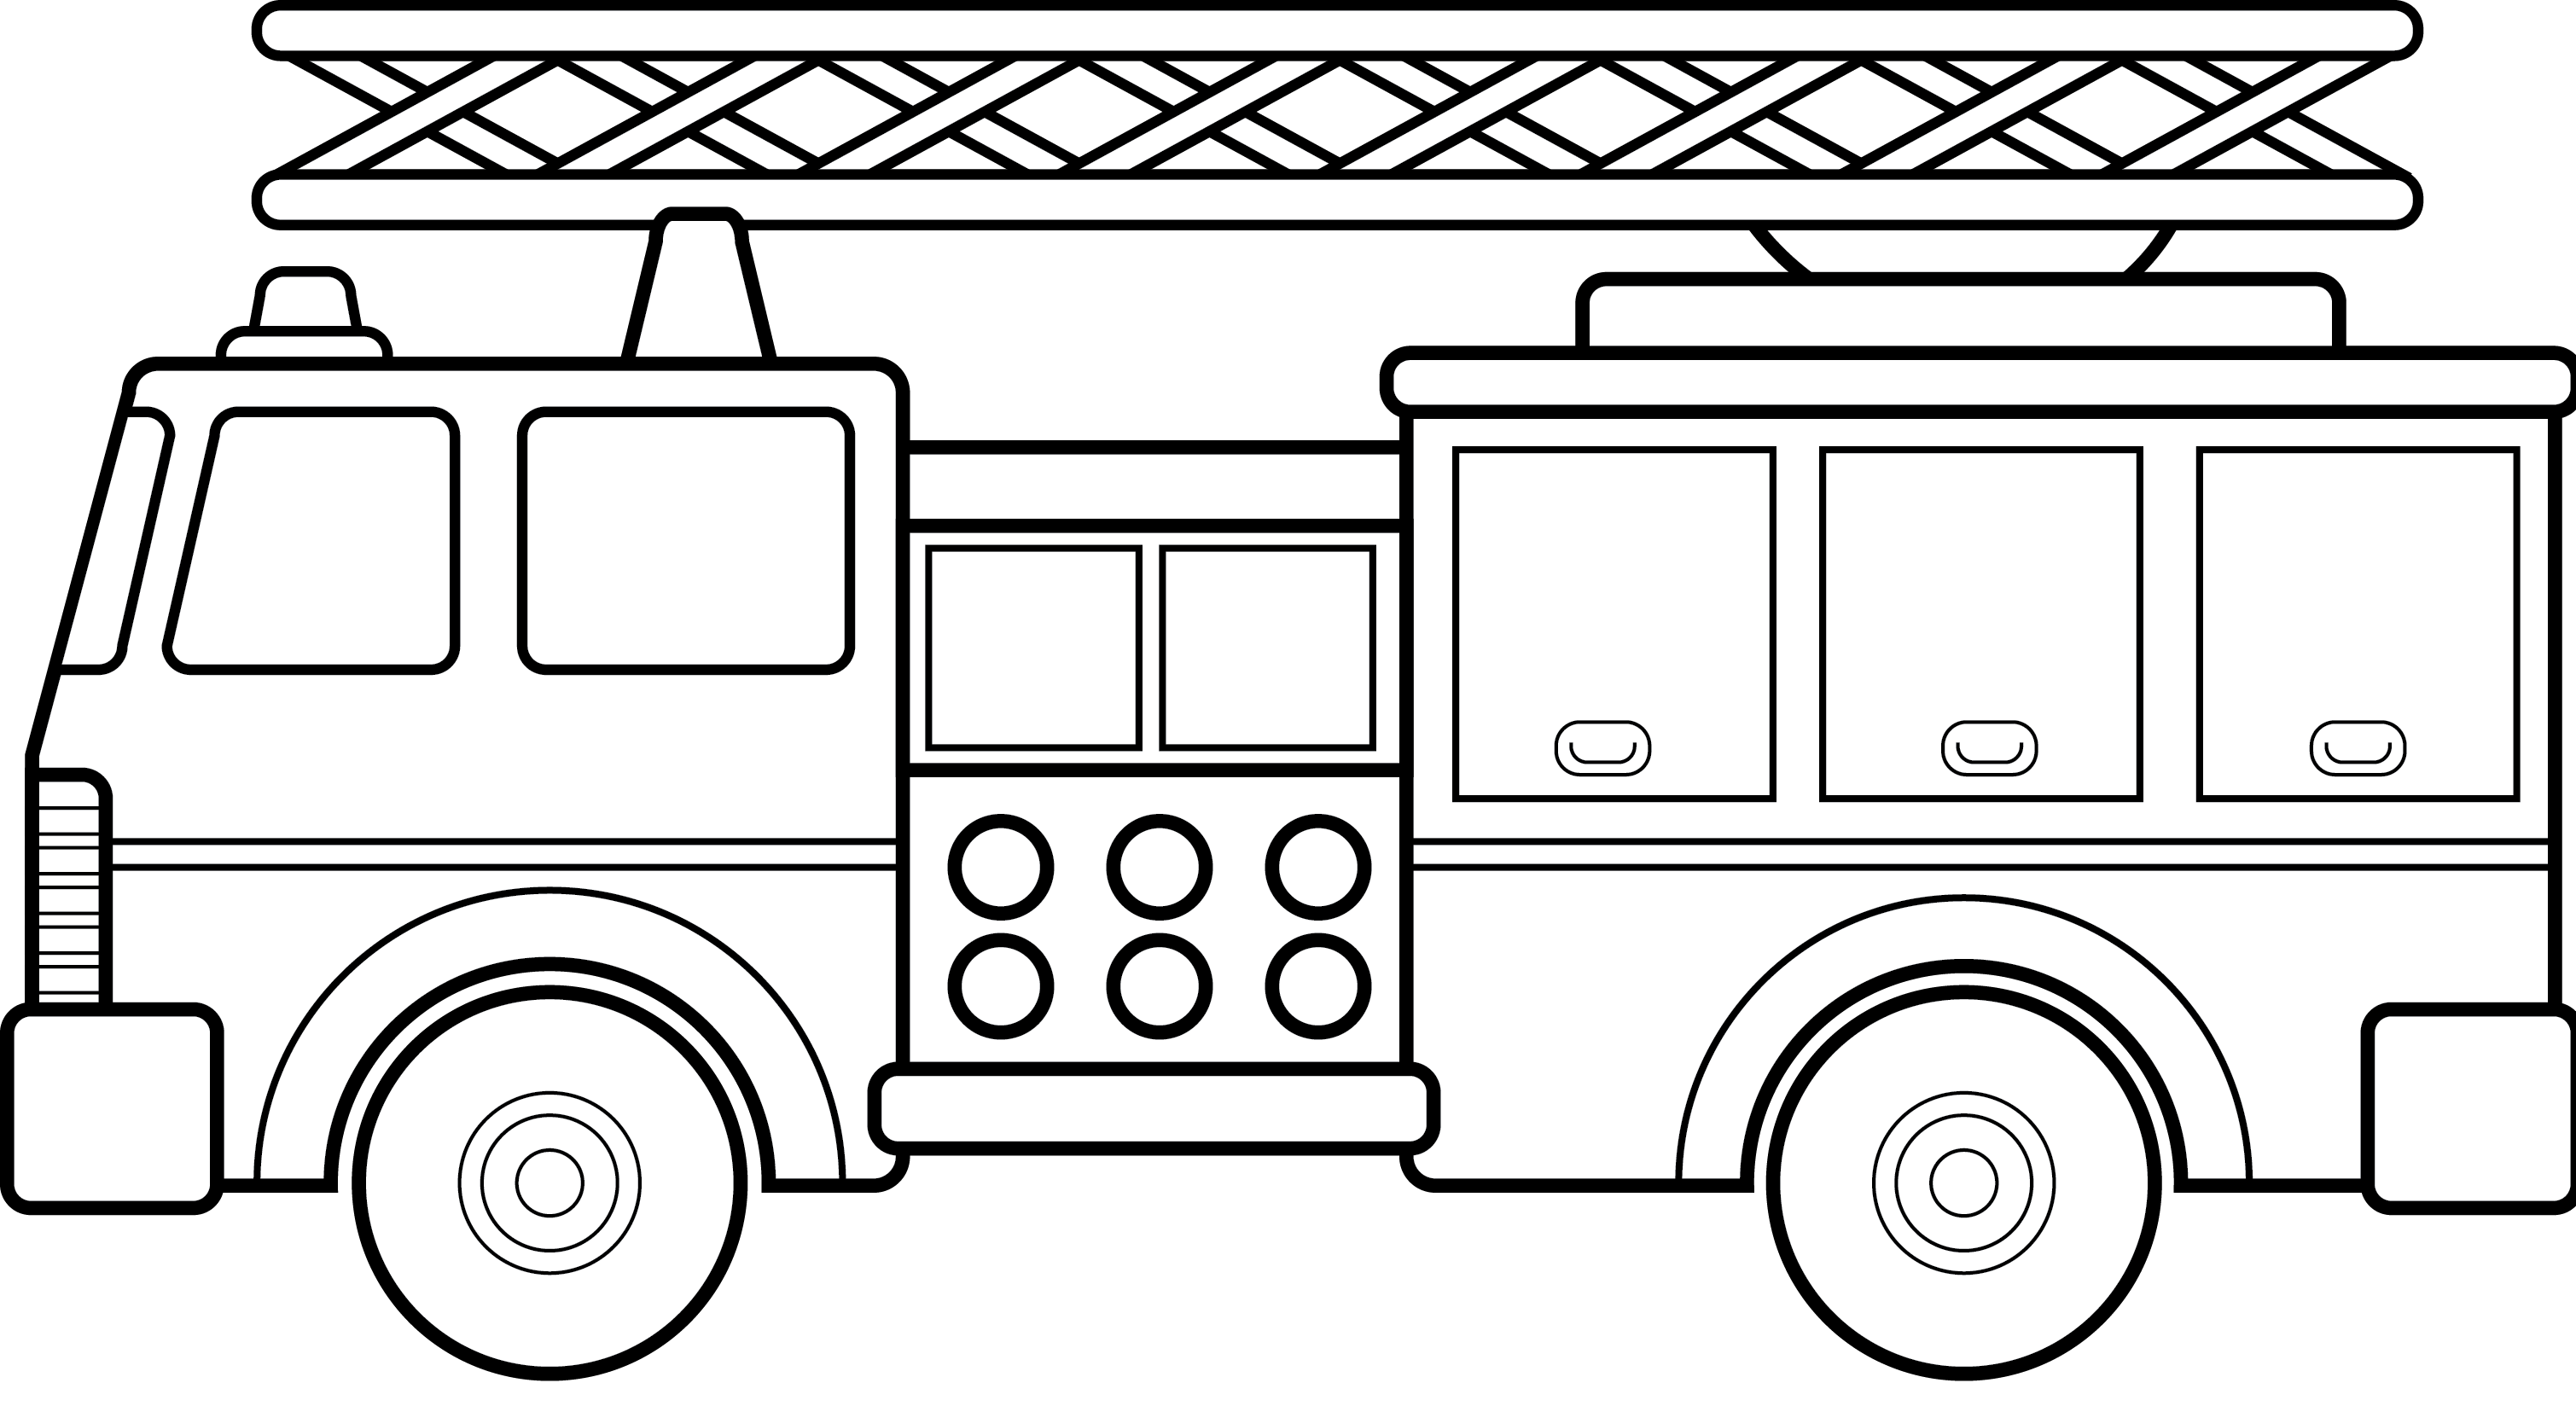 cars and trucks coloring pages - High Quality Coloring Pages